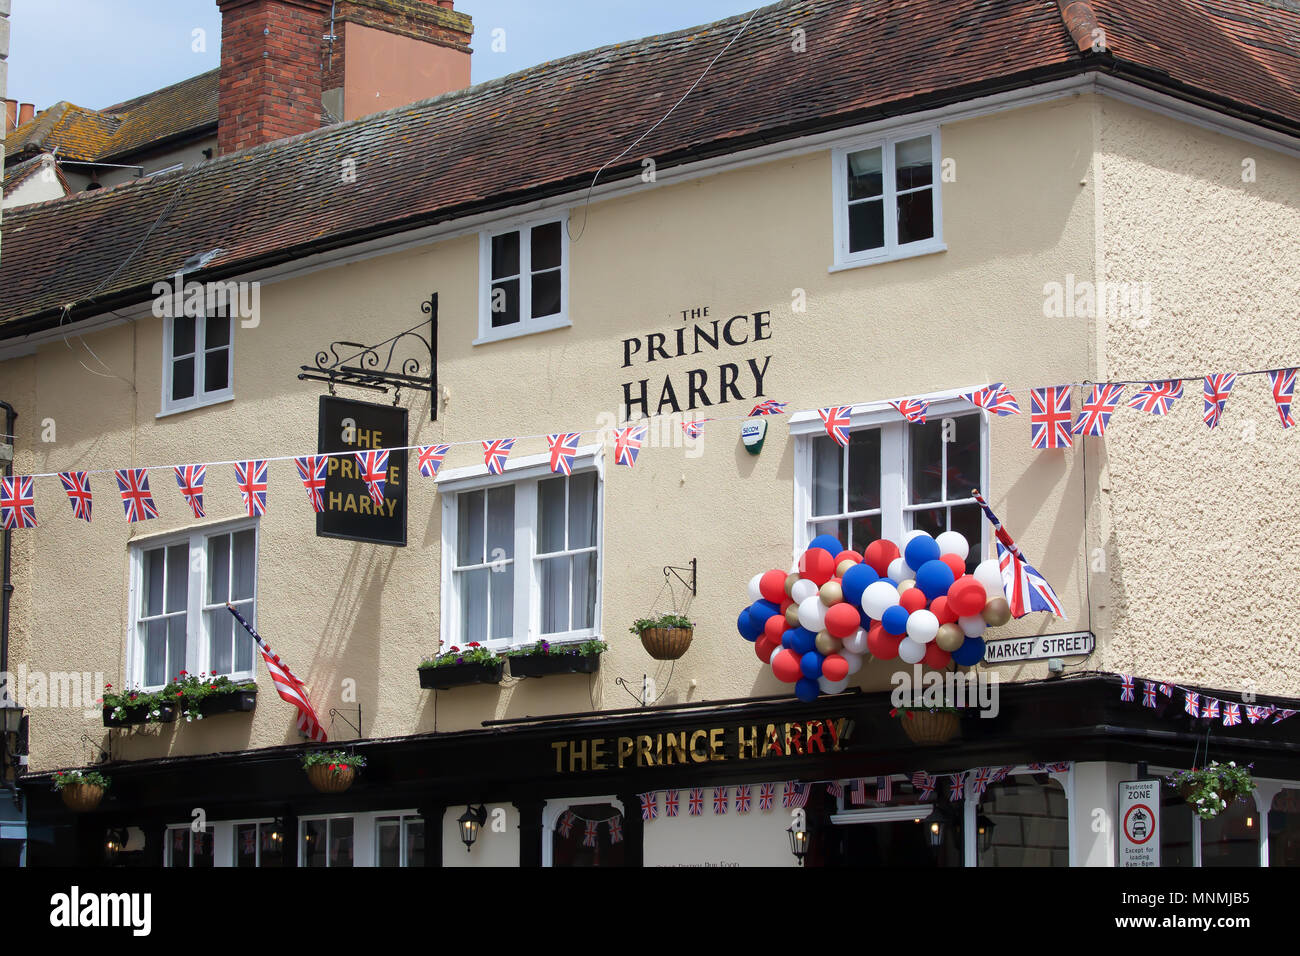 Windsor,UK,18th May 2018,The Royal Wedding preparations get underway as excitement builds in Windsor ahead of the marriage tomorrow of Prince Harry to Meghan Markle. There is an increased police presence and the shops are full of wedding souvenirs also lamp posts are adorned with union jack flags. Large crowds have descended on the town to soak up the atmosphere.Credit Keith Larby/Alamy Live News Stock Photo